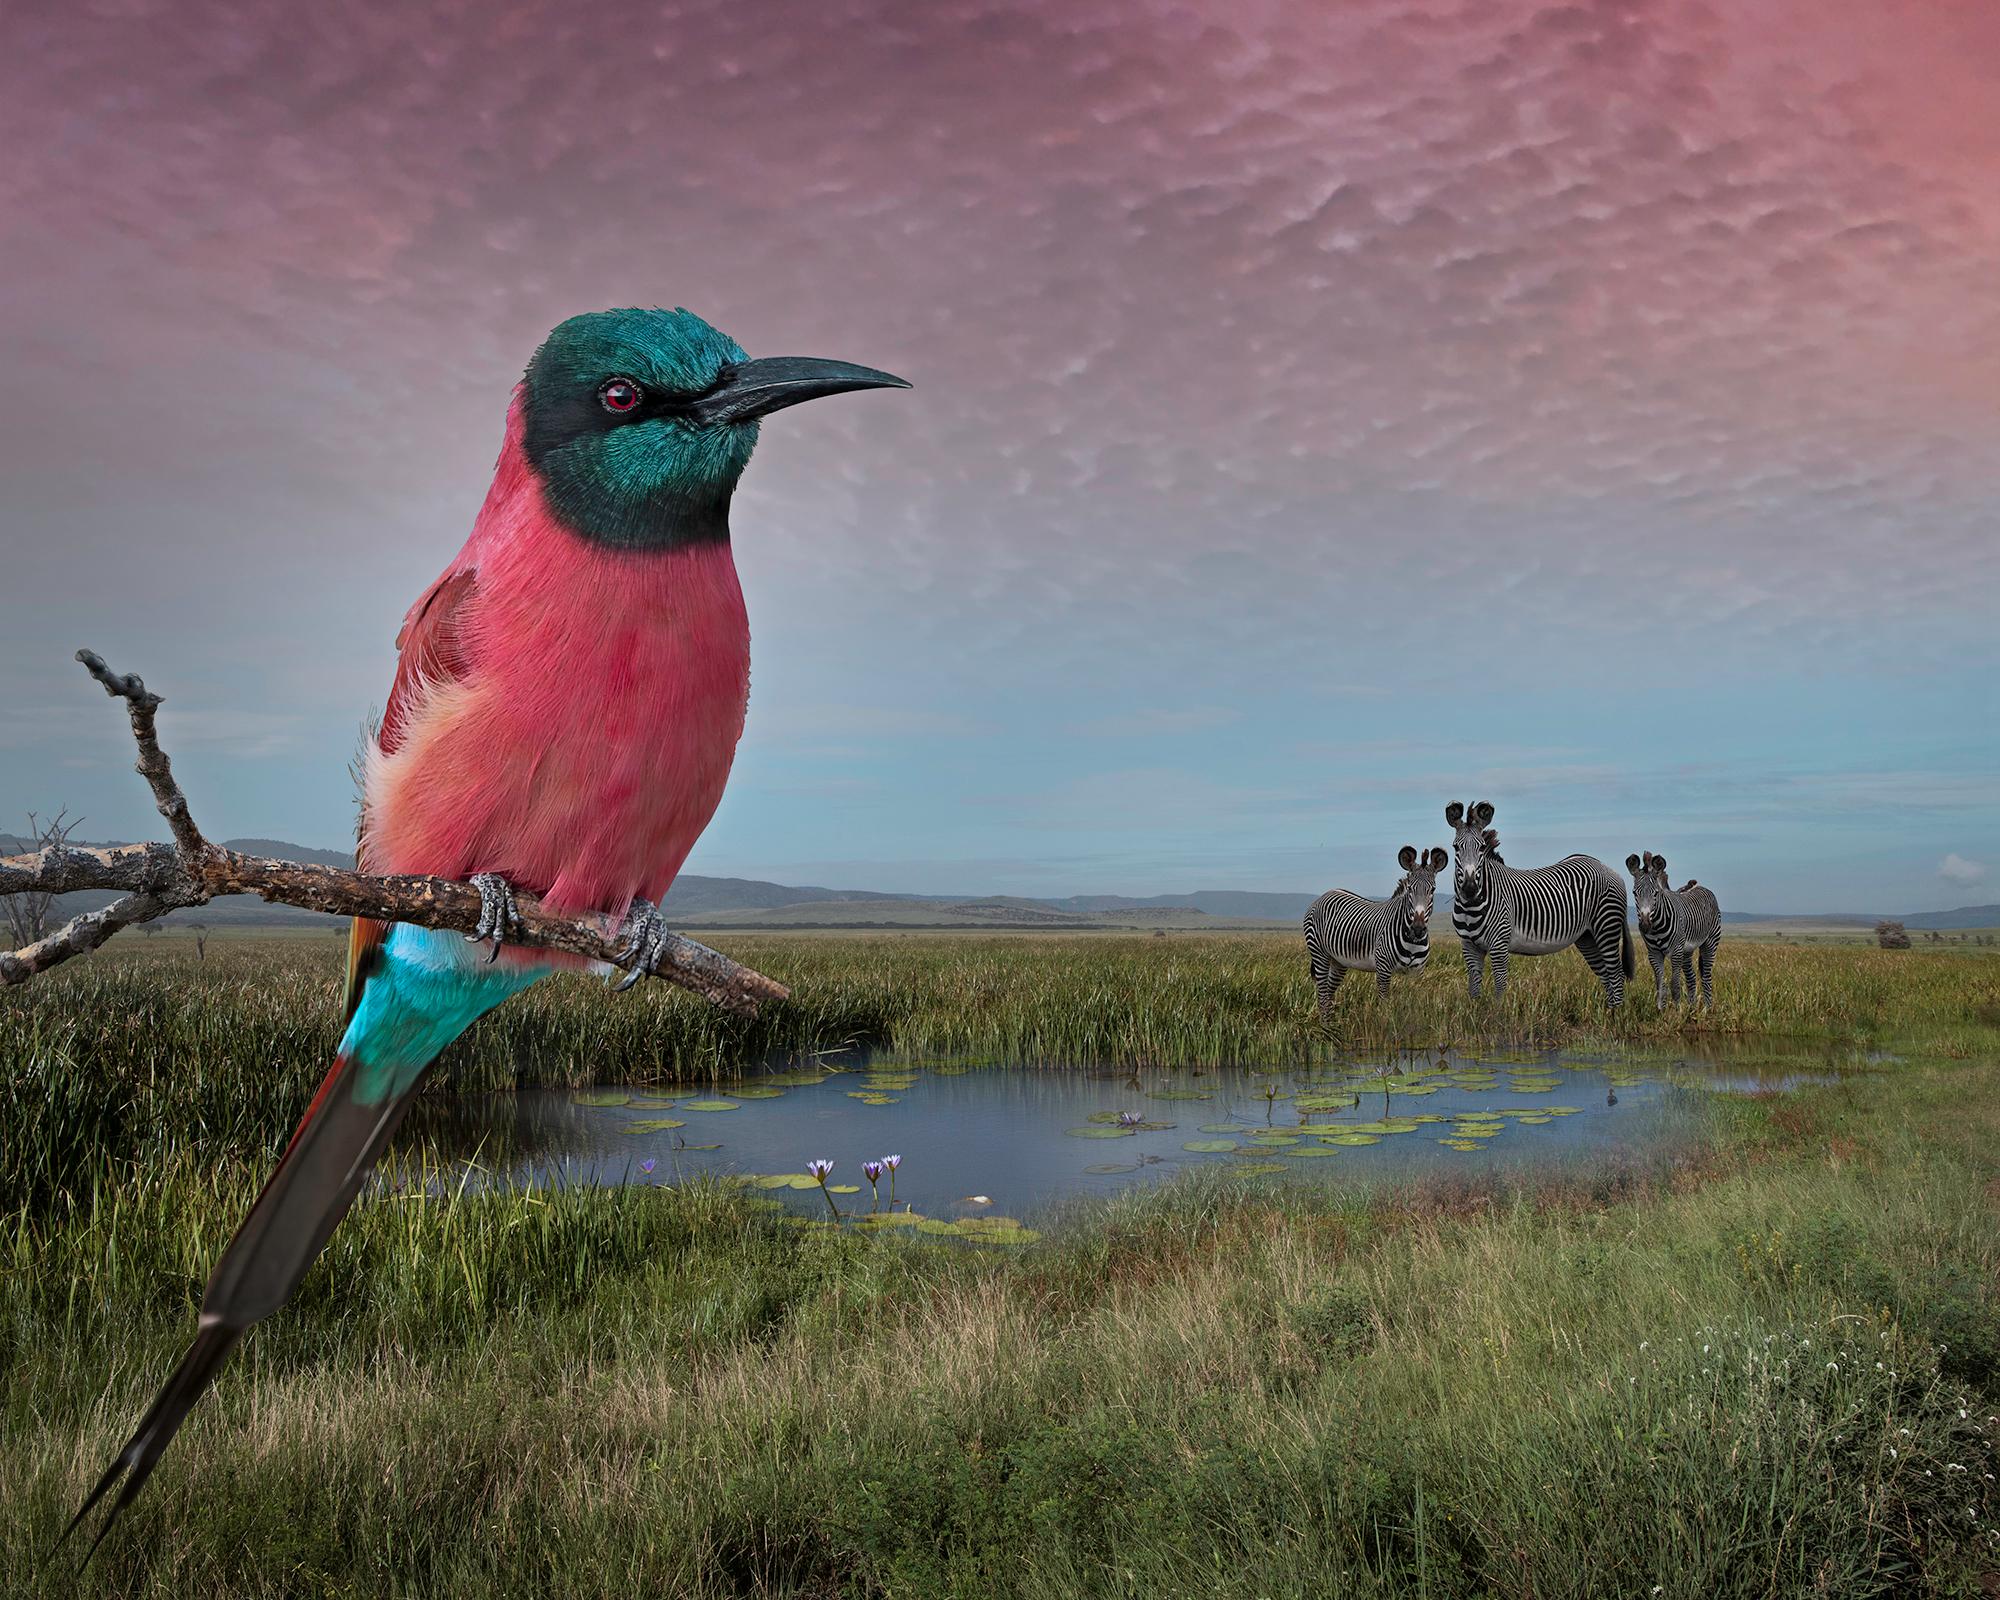 Northern Carmine Bee-Eater and Grevy's Zebra by Cheryl Medow, 2021